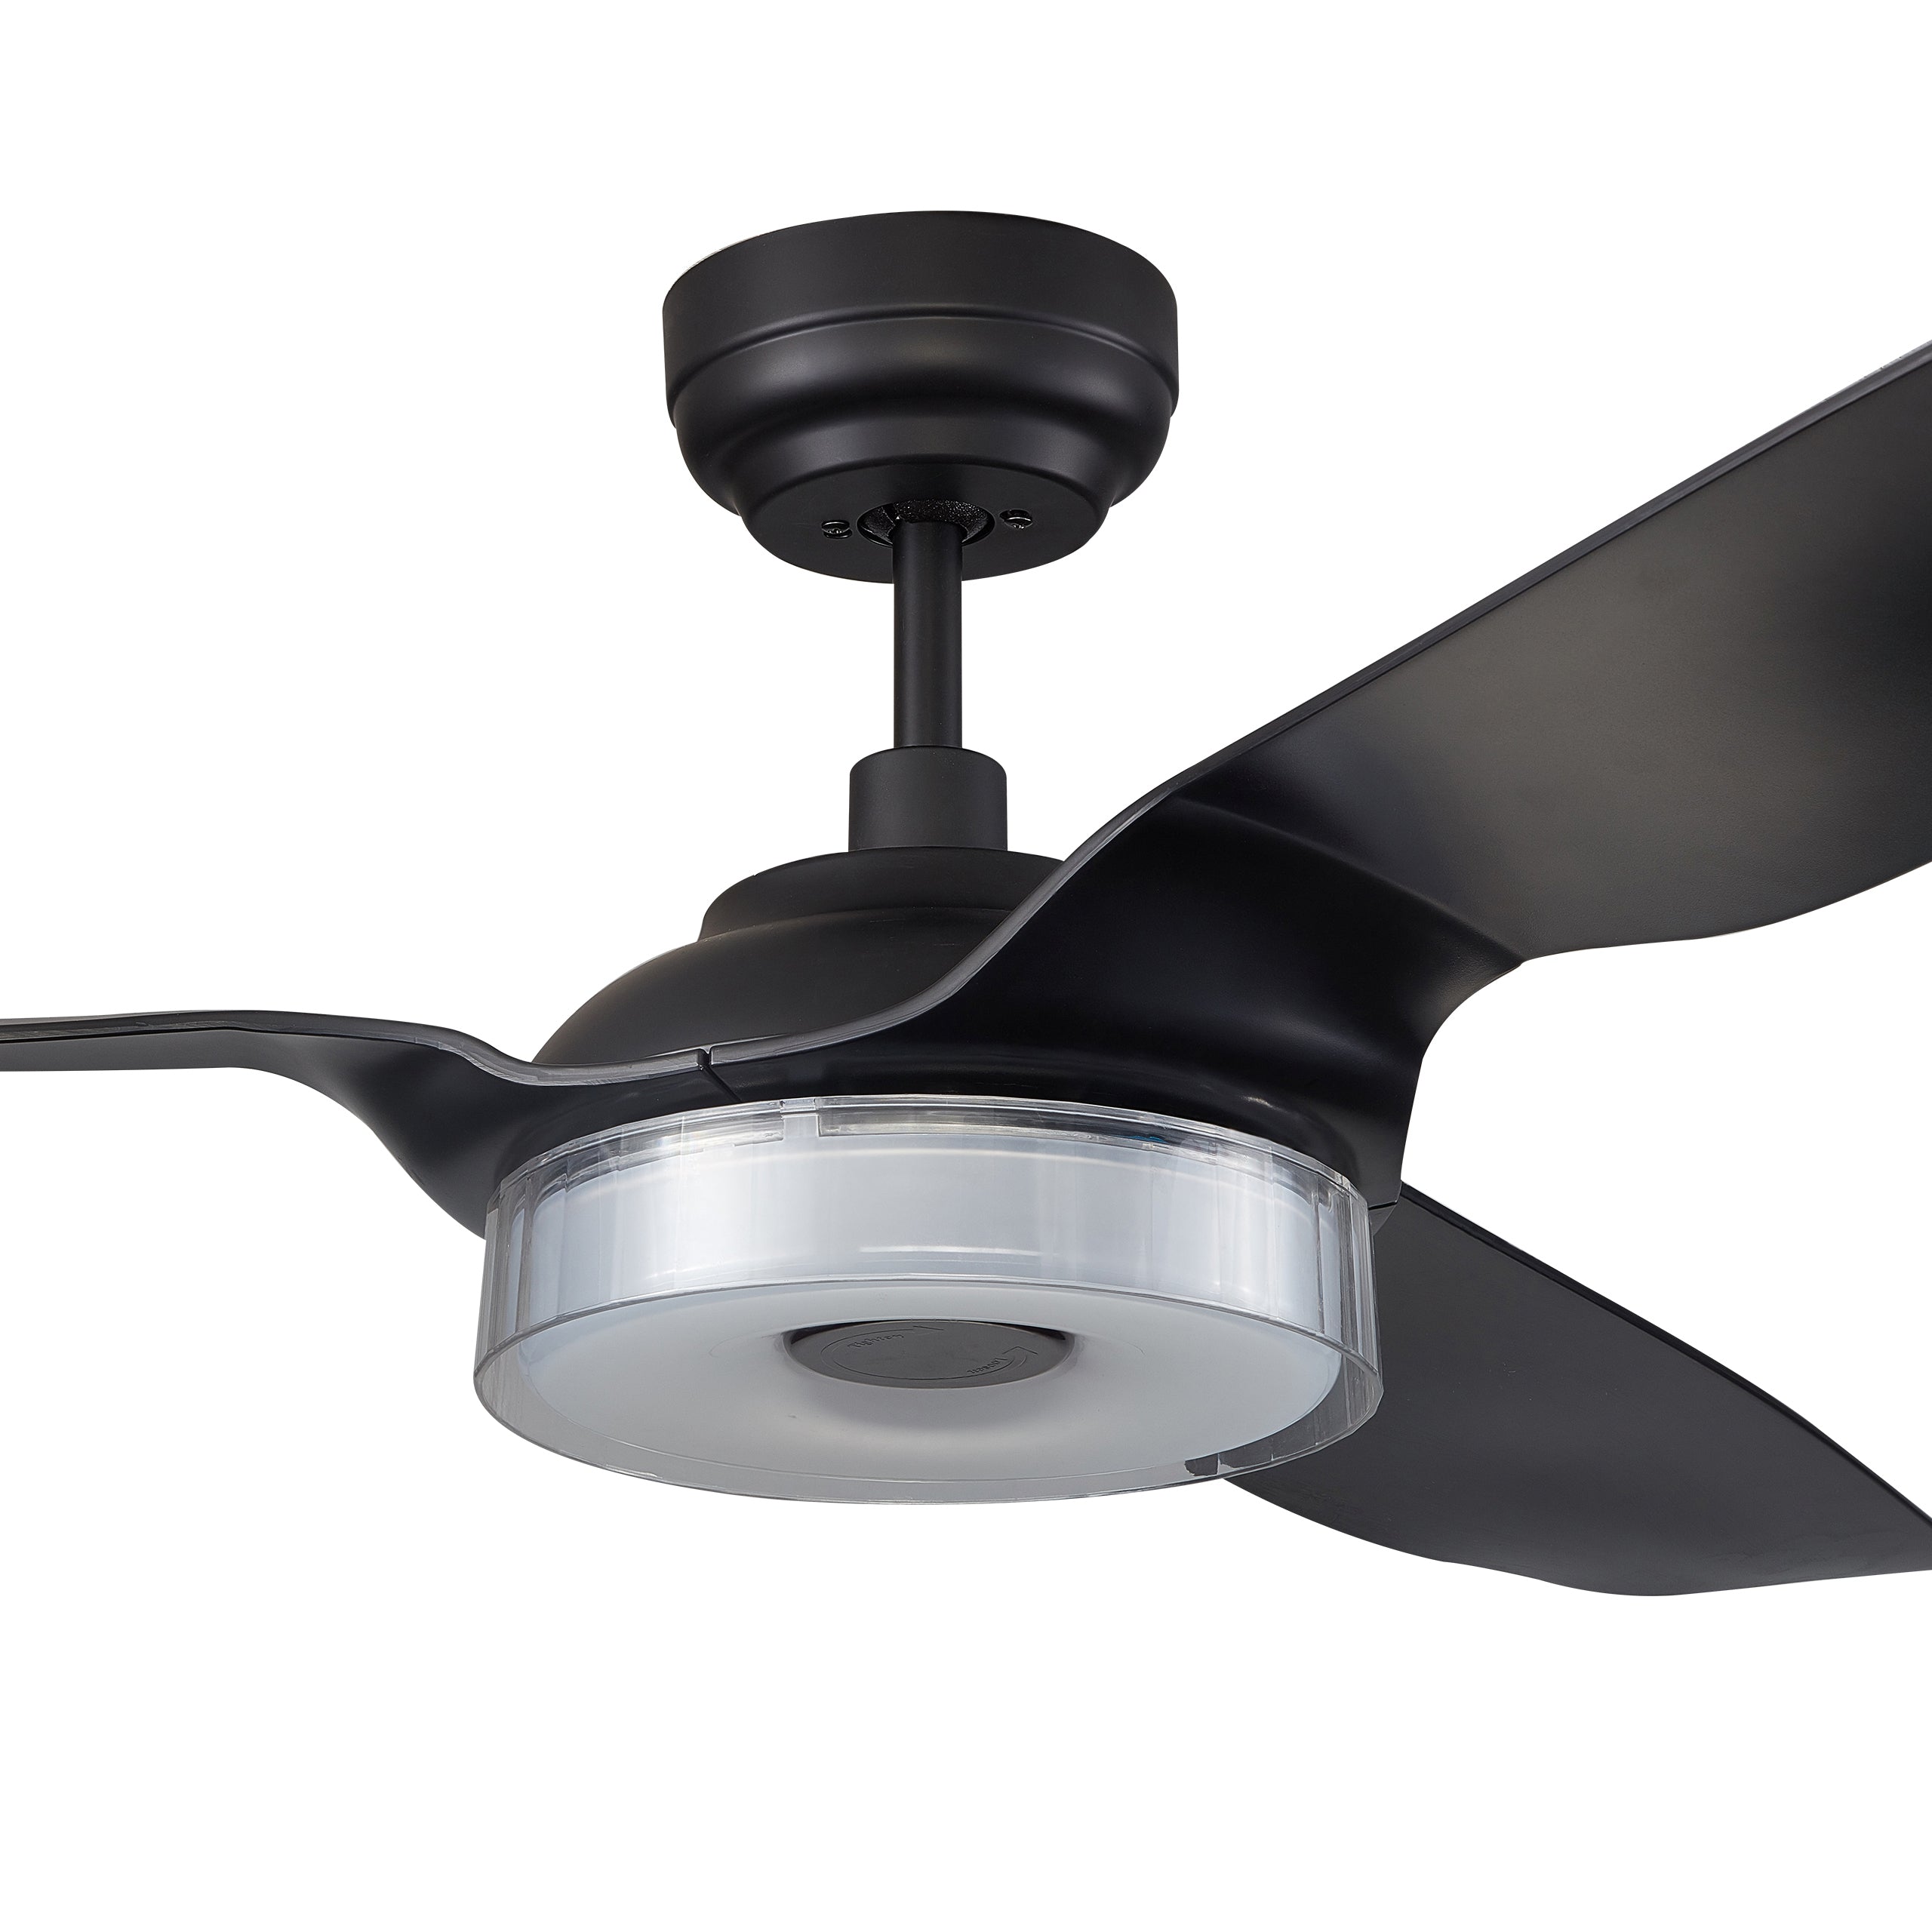 The Smafan 52&#39;&#39; Icebreaker smart fan delivers high and energy-efficient airflow in a sleek design. With dimmable integrated LED, 10-Speed whisper-quiet DC motor, available remote, phone app, and voice integration control, and airfoils in classic white or black or clear, Icebreaker helps you enjoy your better life.